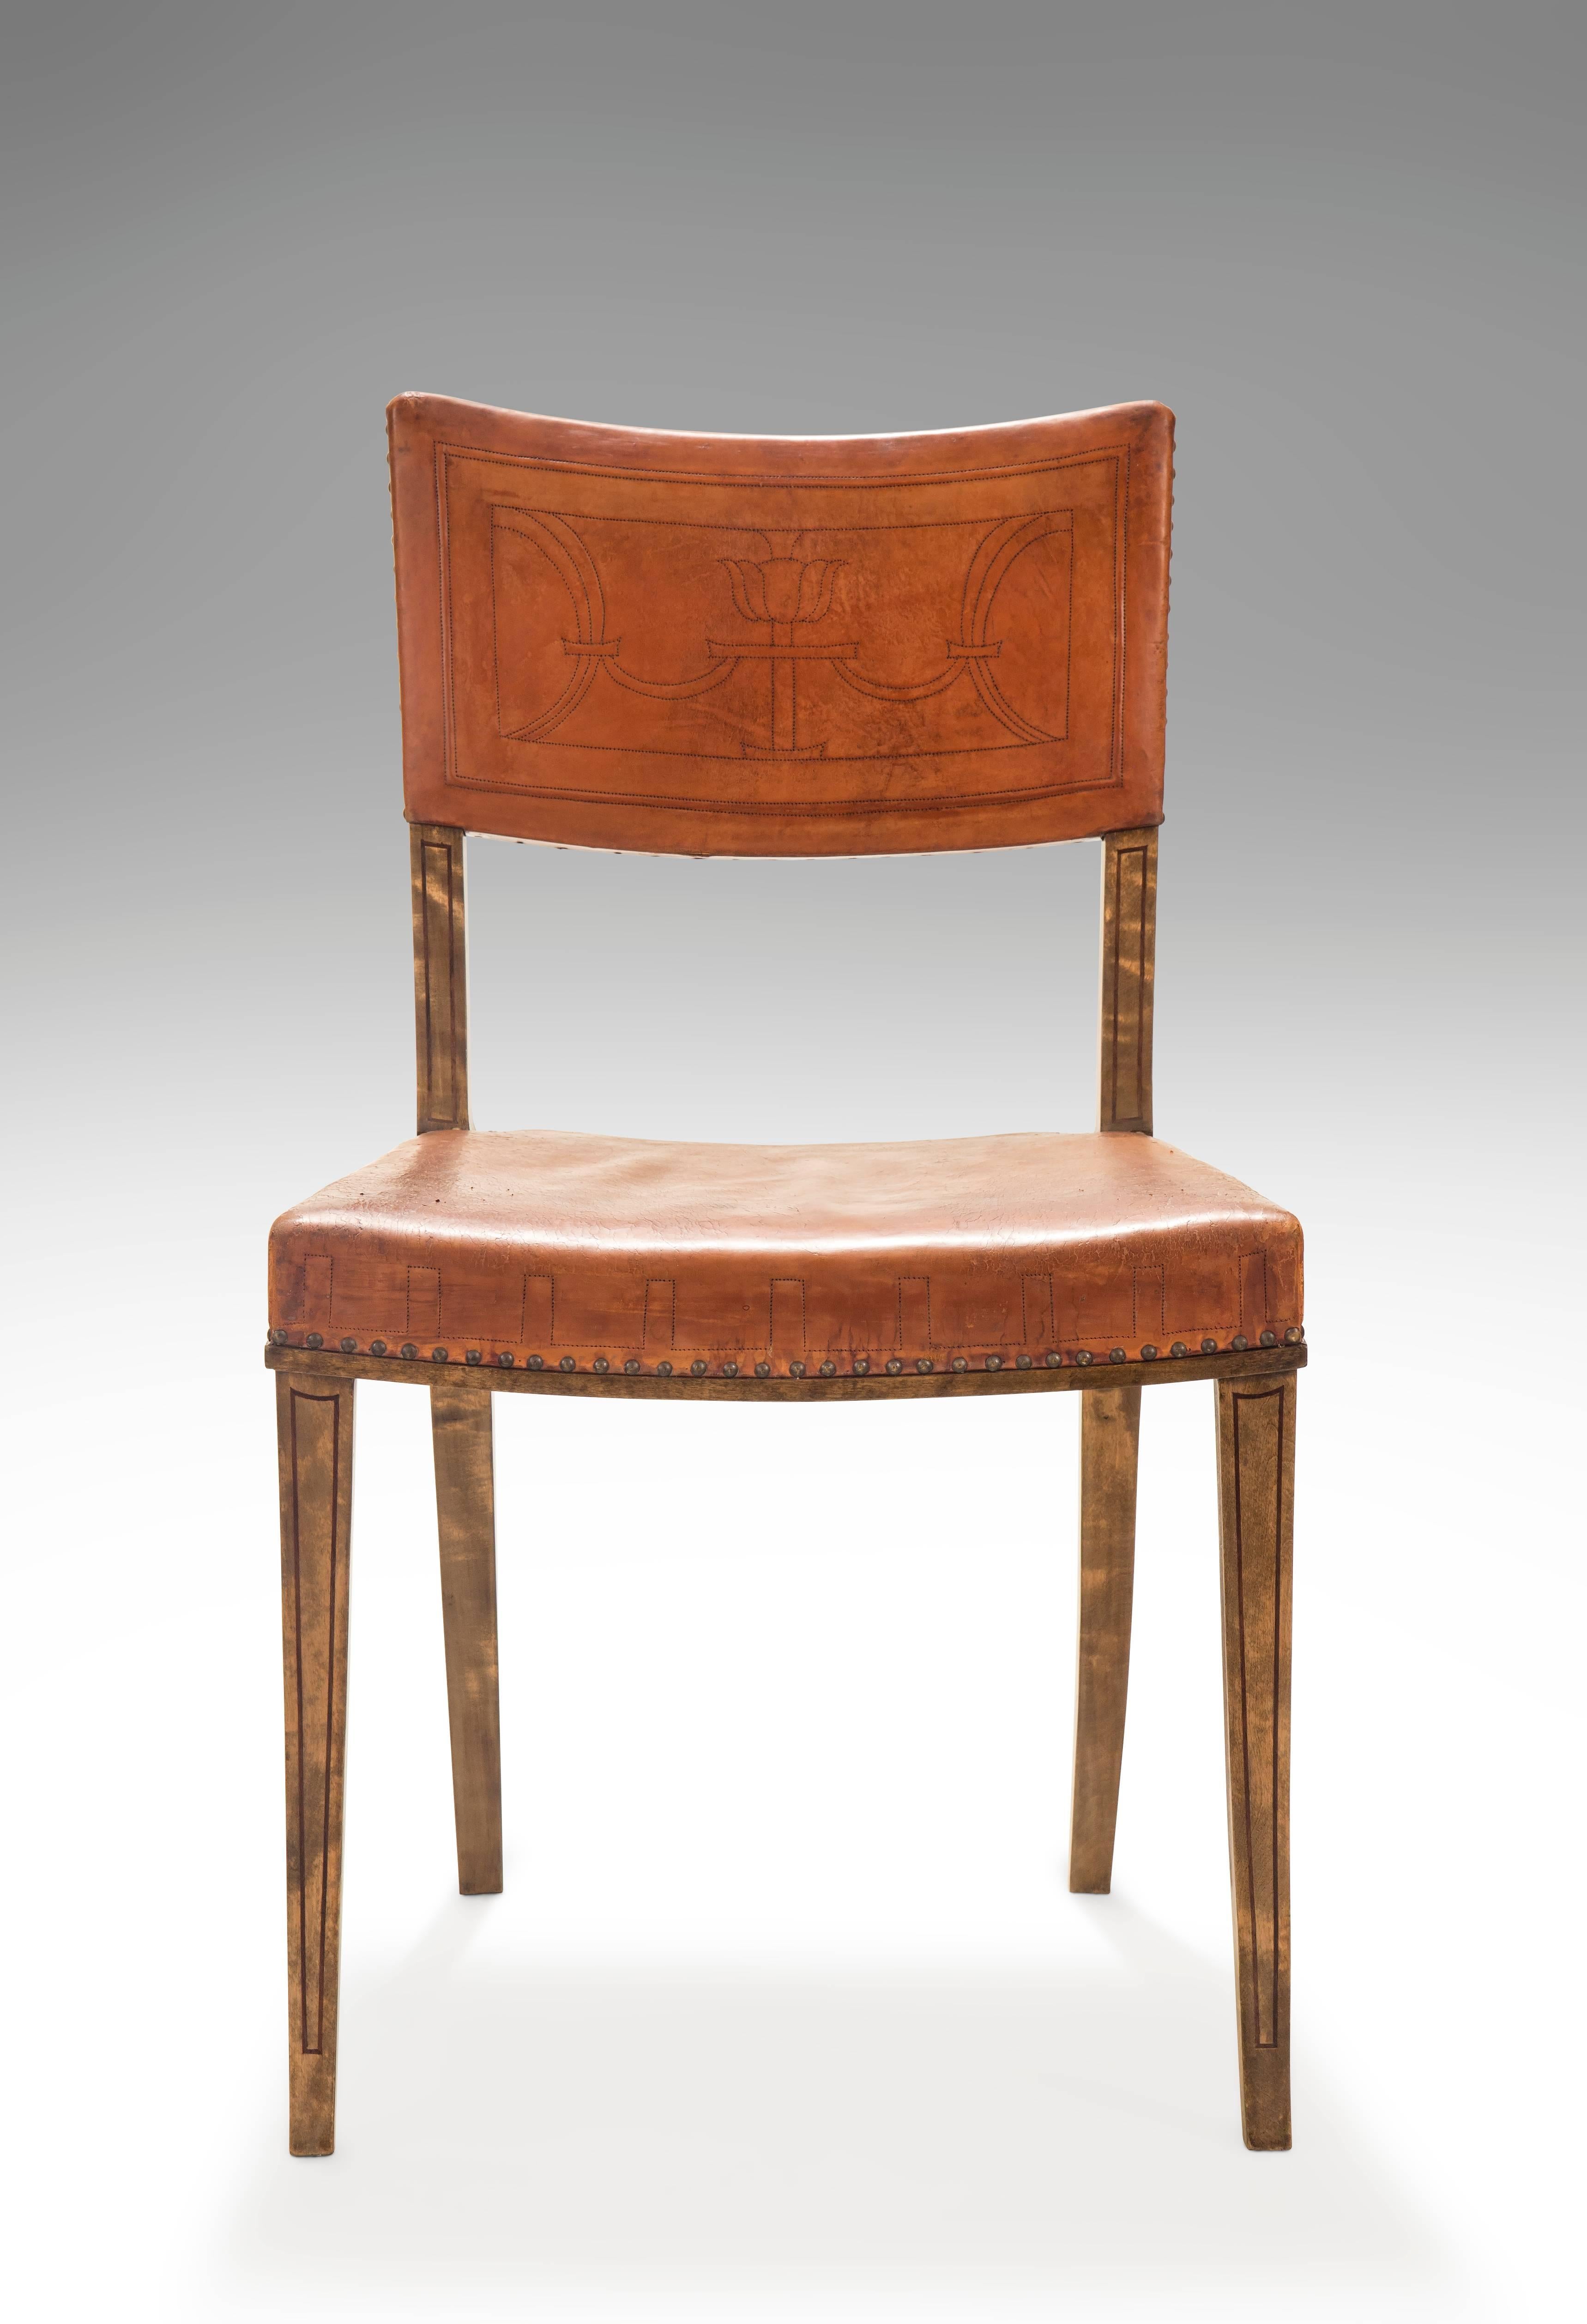 Graceful, elegant and even better comfortable. Each with an upholstered vintage cognac leather back centering an embossed classical design, over a trapezoidal seat with a Greek key patterned leather, on four purple heart inlaid saber legs.

Related